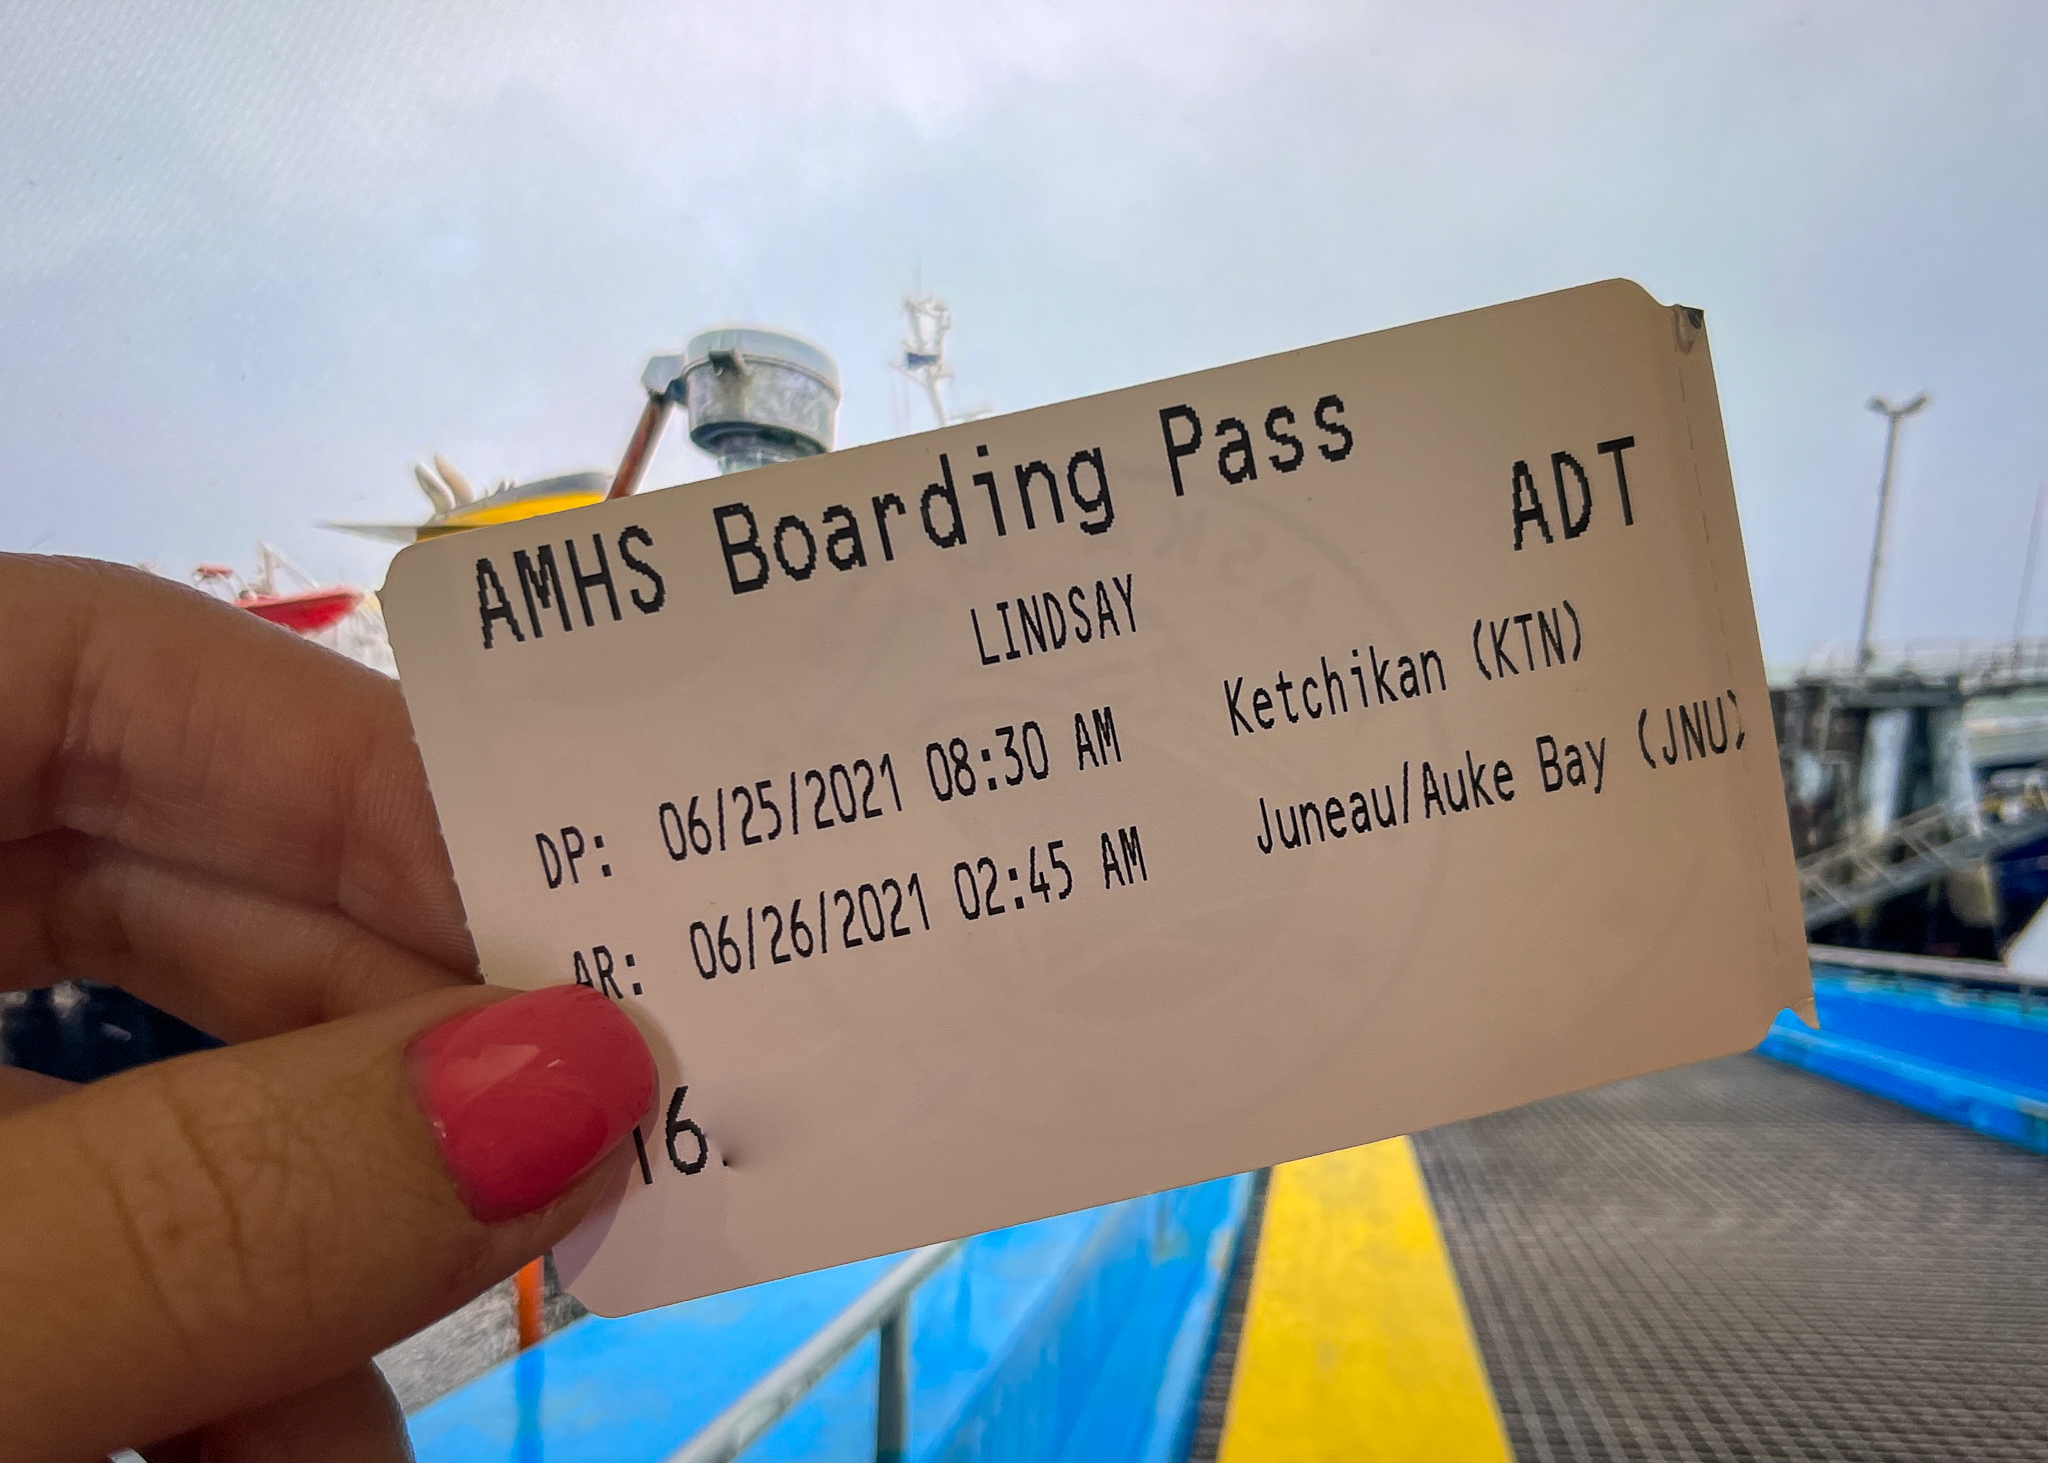 A ticket to ride the Alaska Ferry with the MV Matanuska in the background.